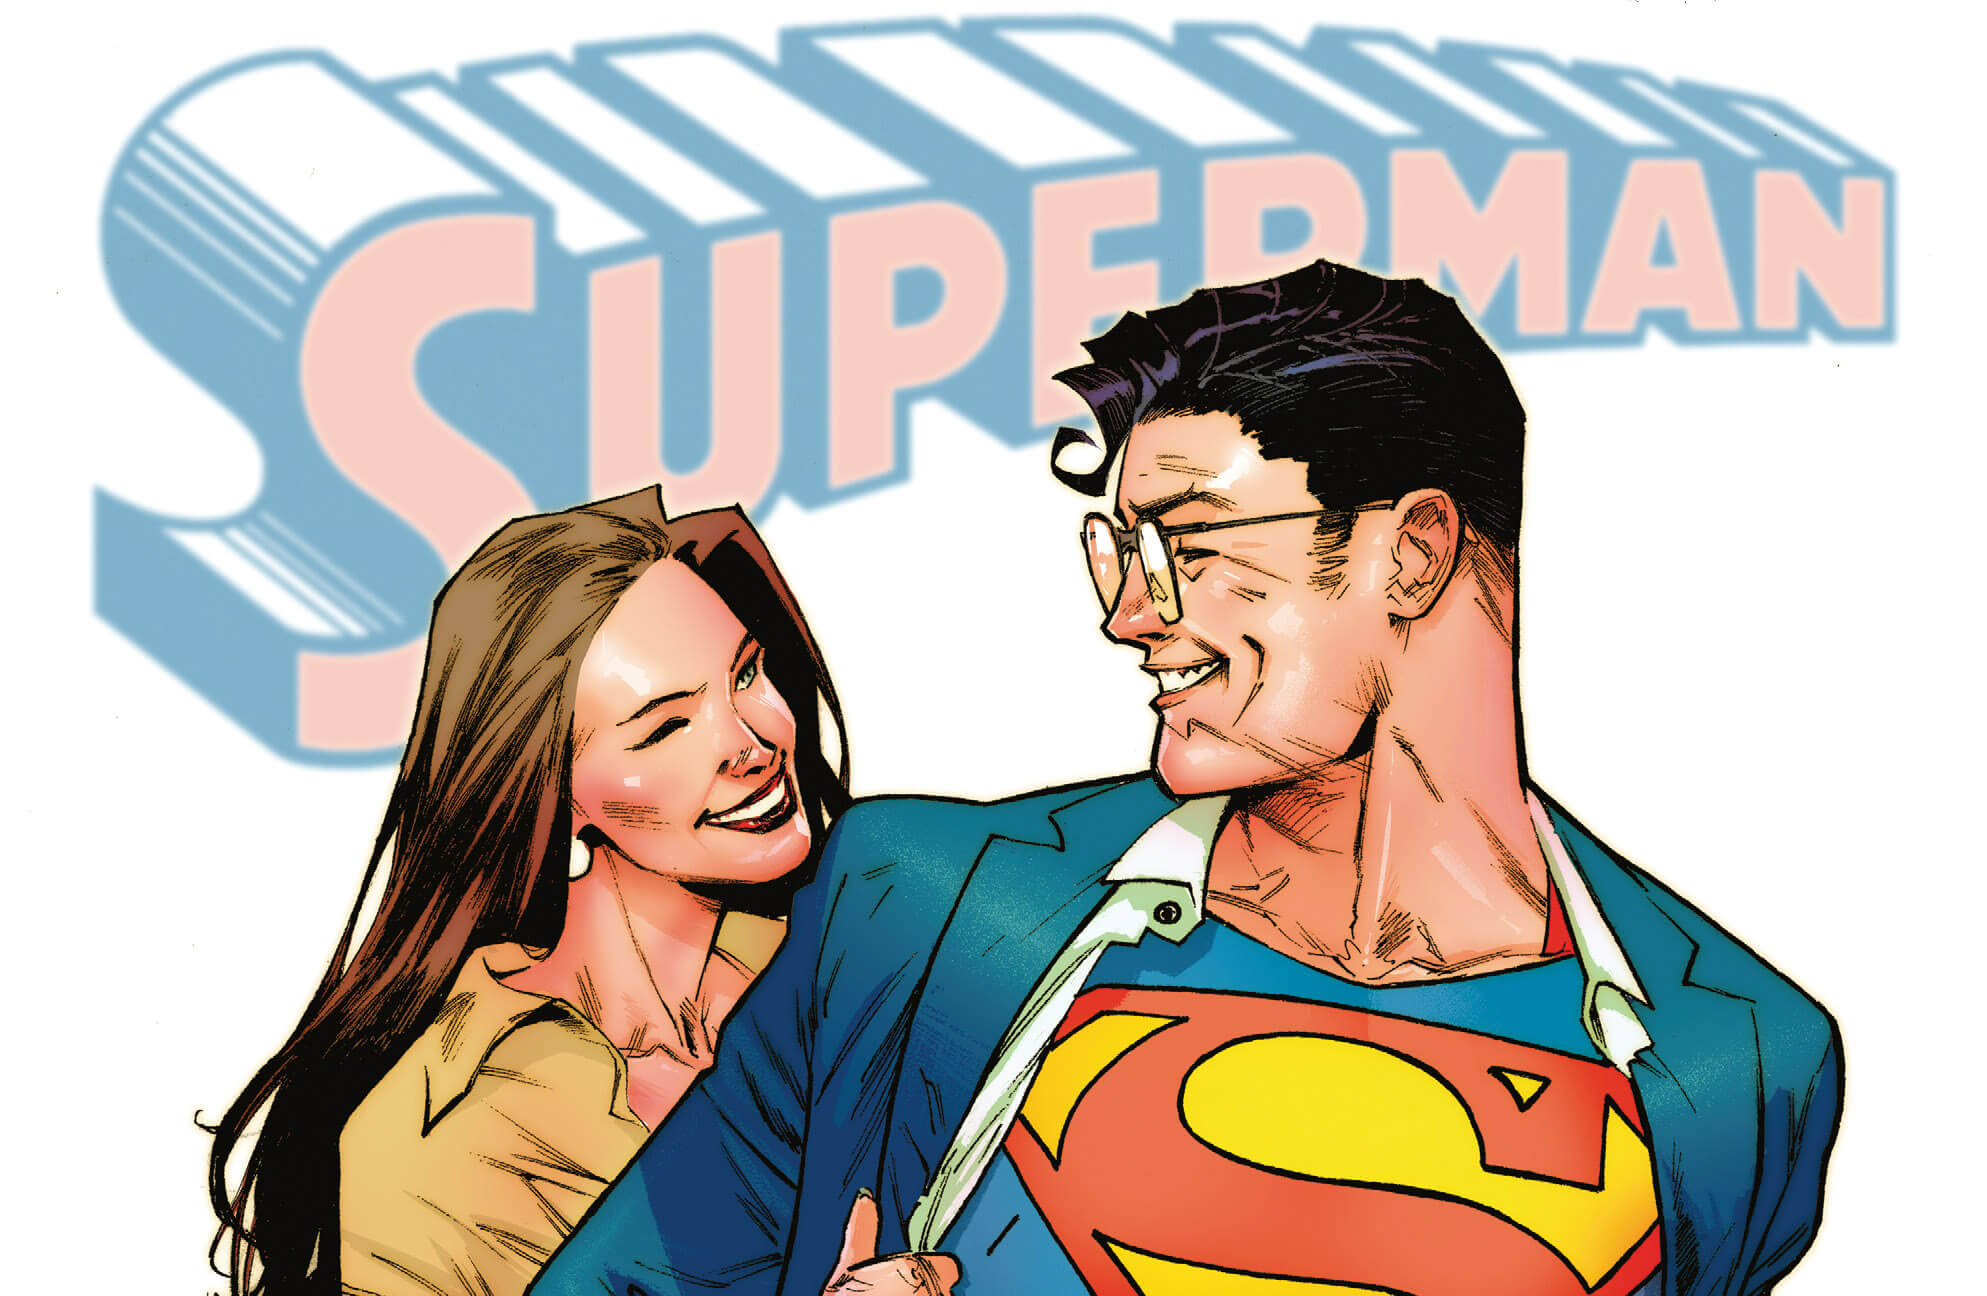 Graphic of Clark Kent revealing his Superman suit next to Lois Lane in front of the word Superman